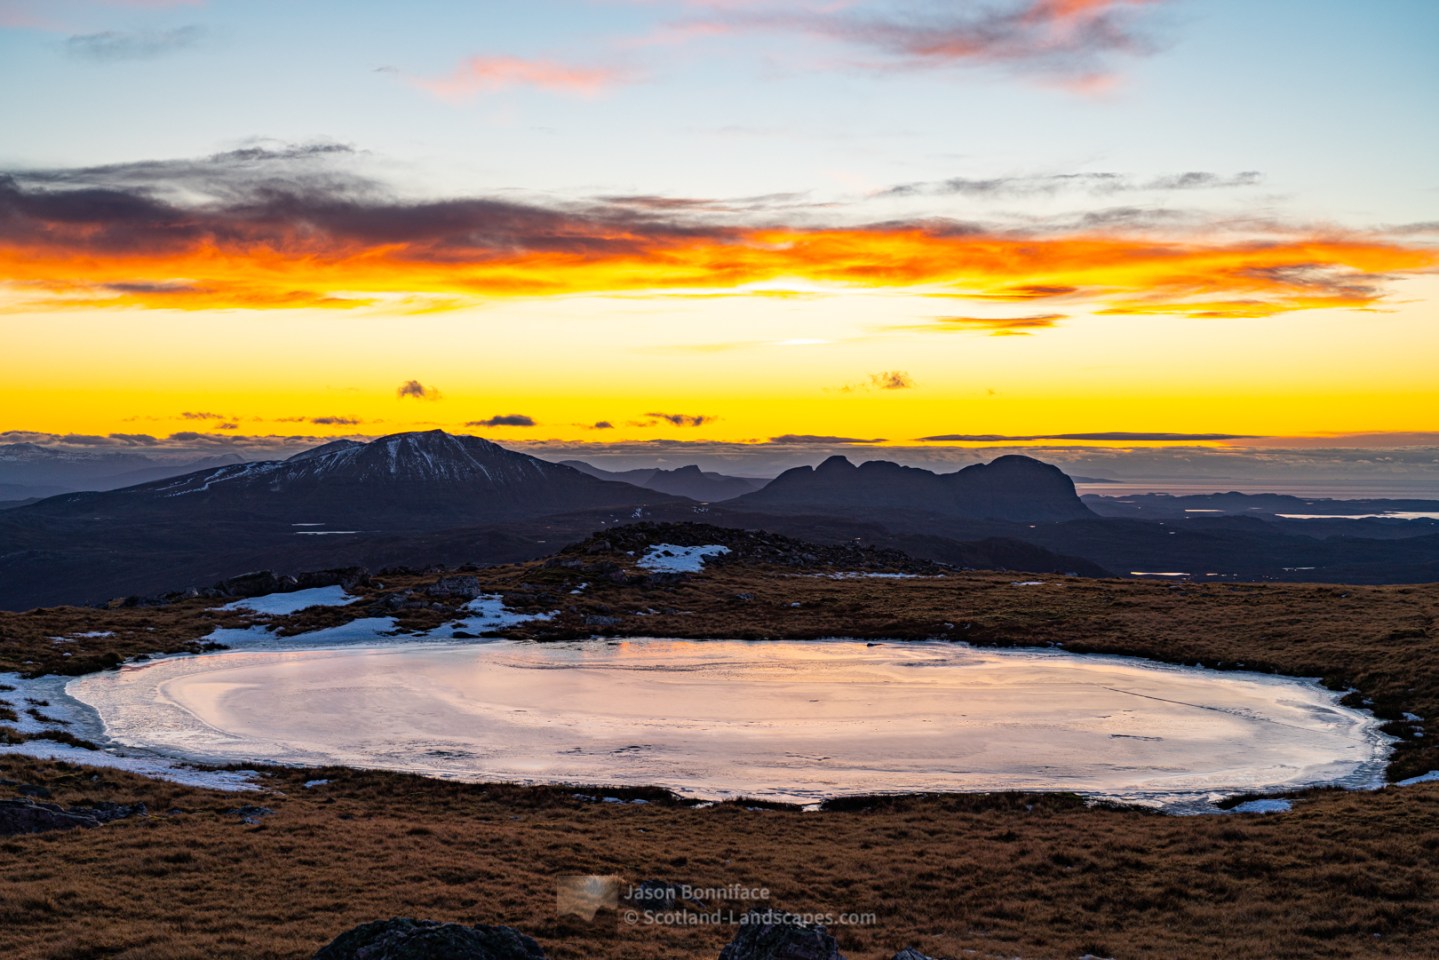 The afterglow, Canisp, Stac Pollaidh and Suilven